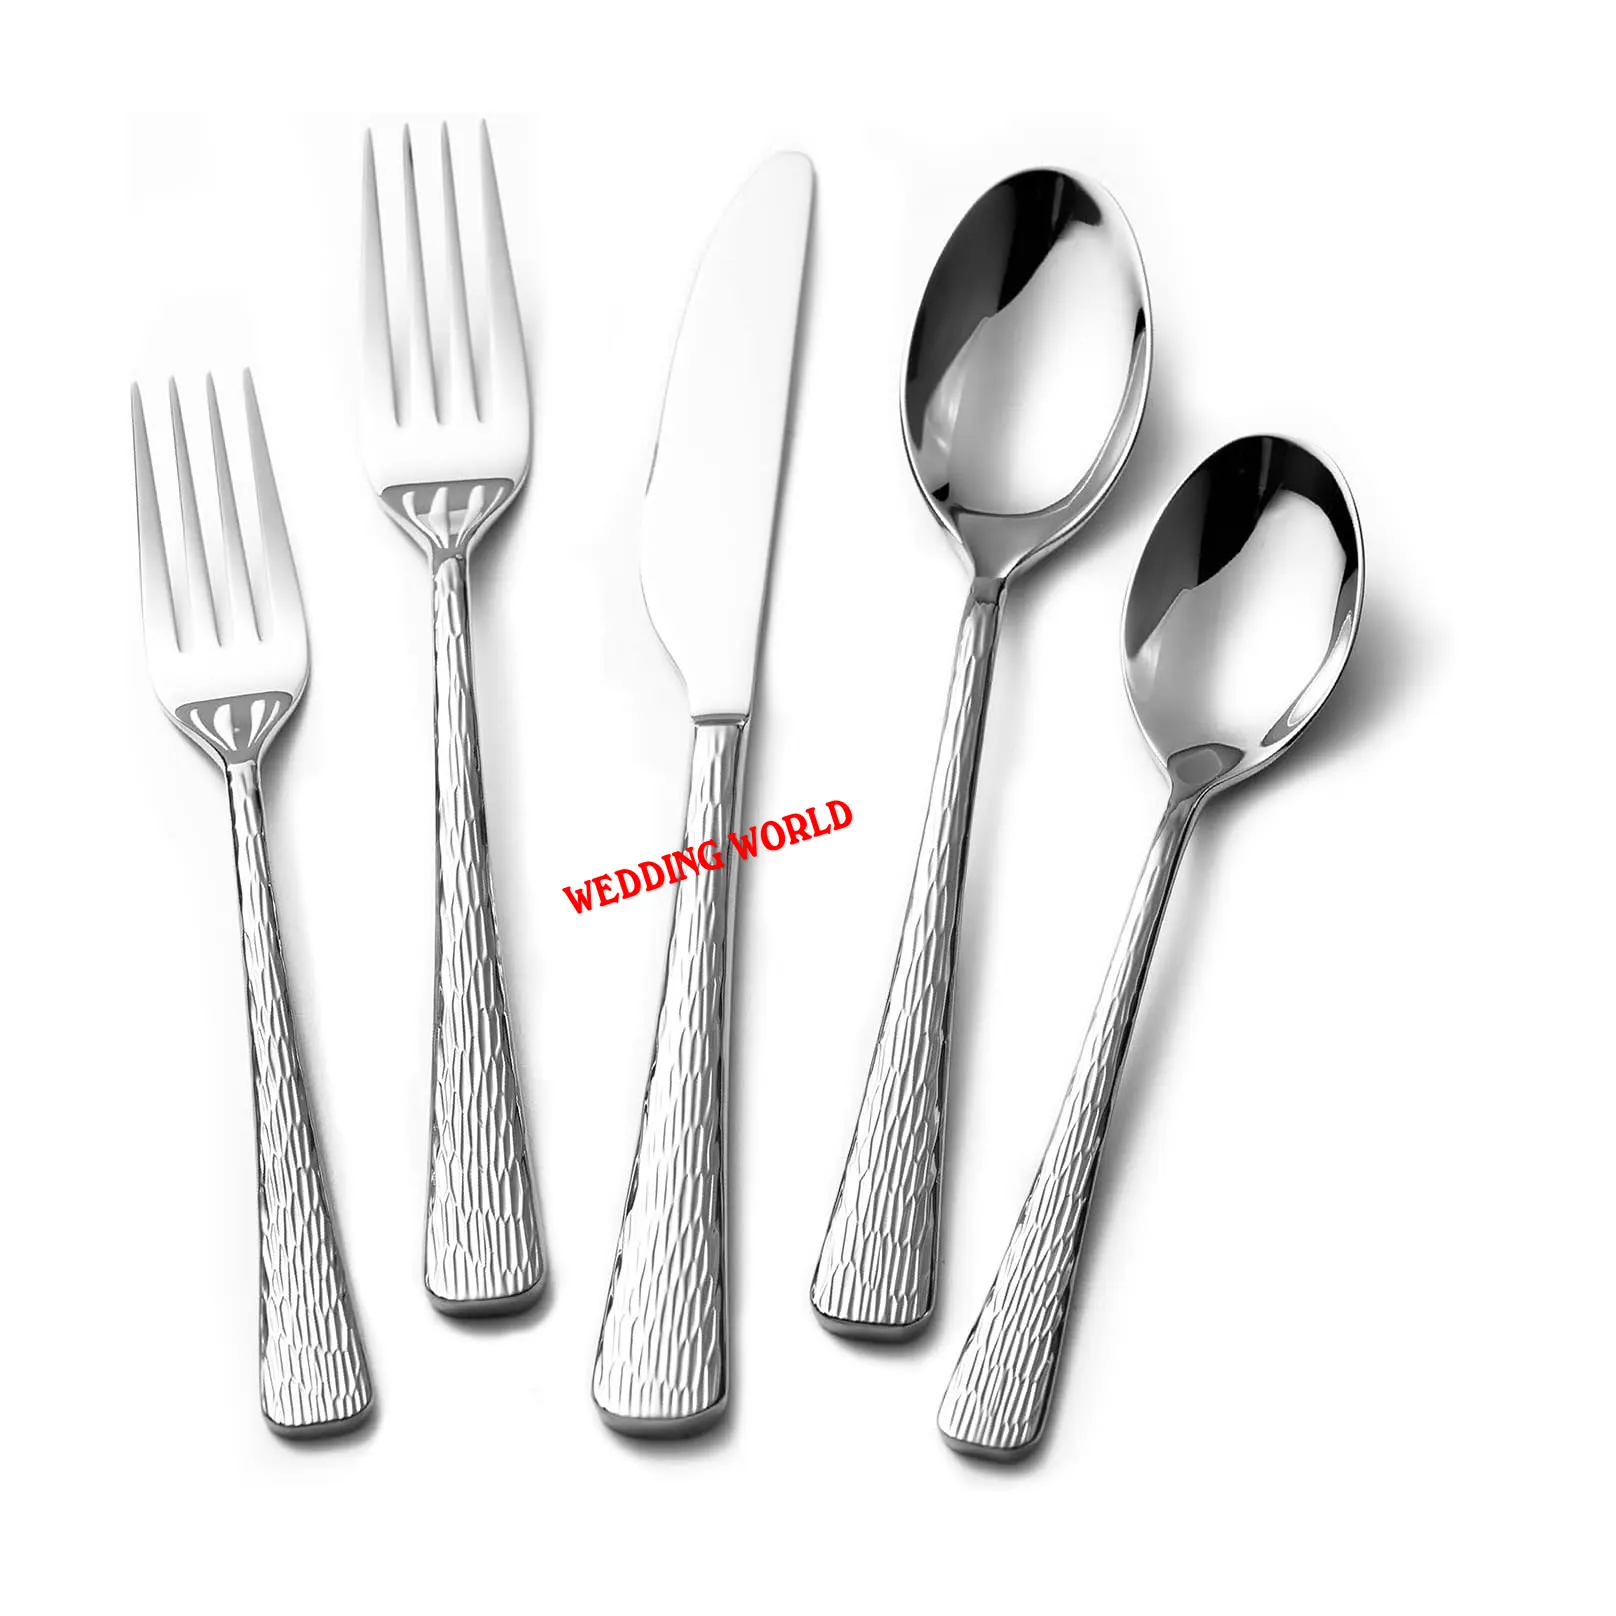 Best Manufacturer Of Handmade Cutlery Classic Stylish New Design Premium Look Customized Top Selling Metal Cutlery At Best Price